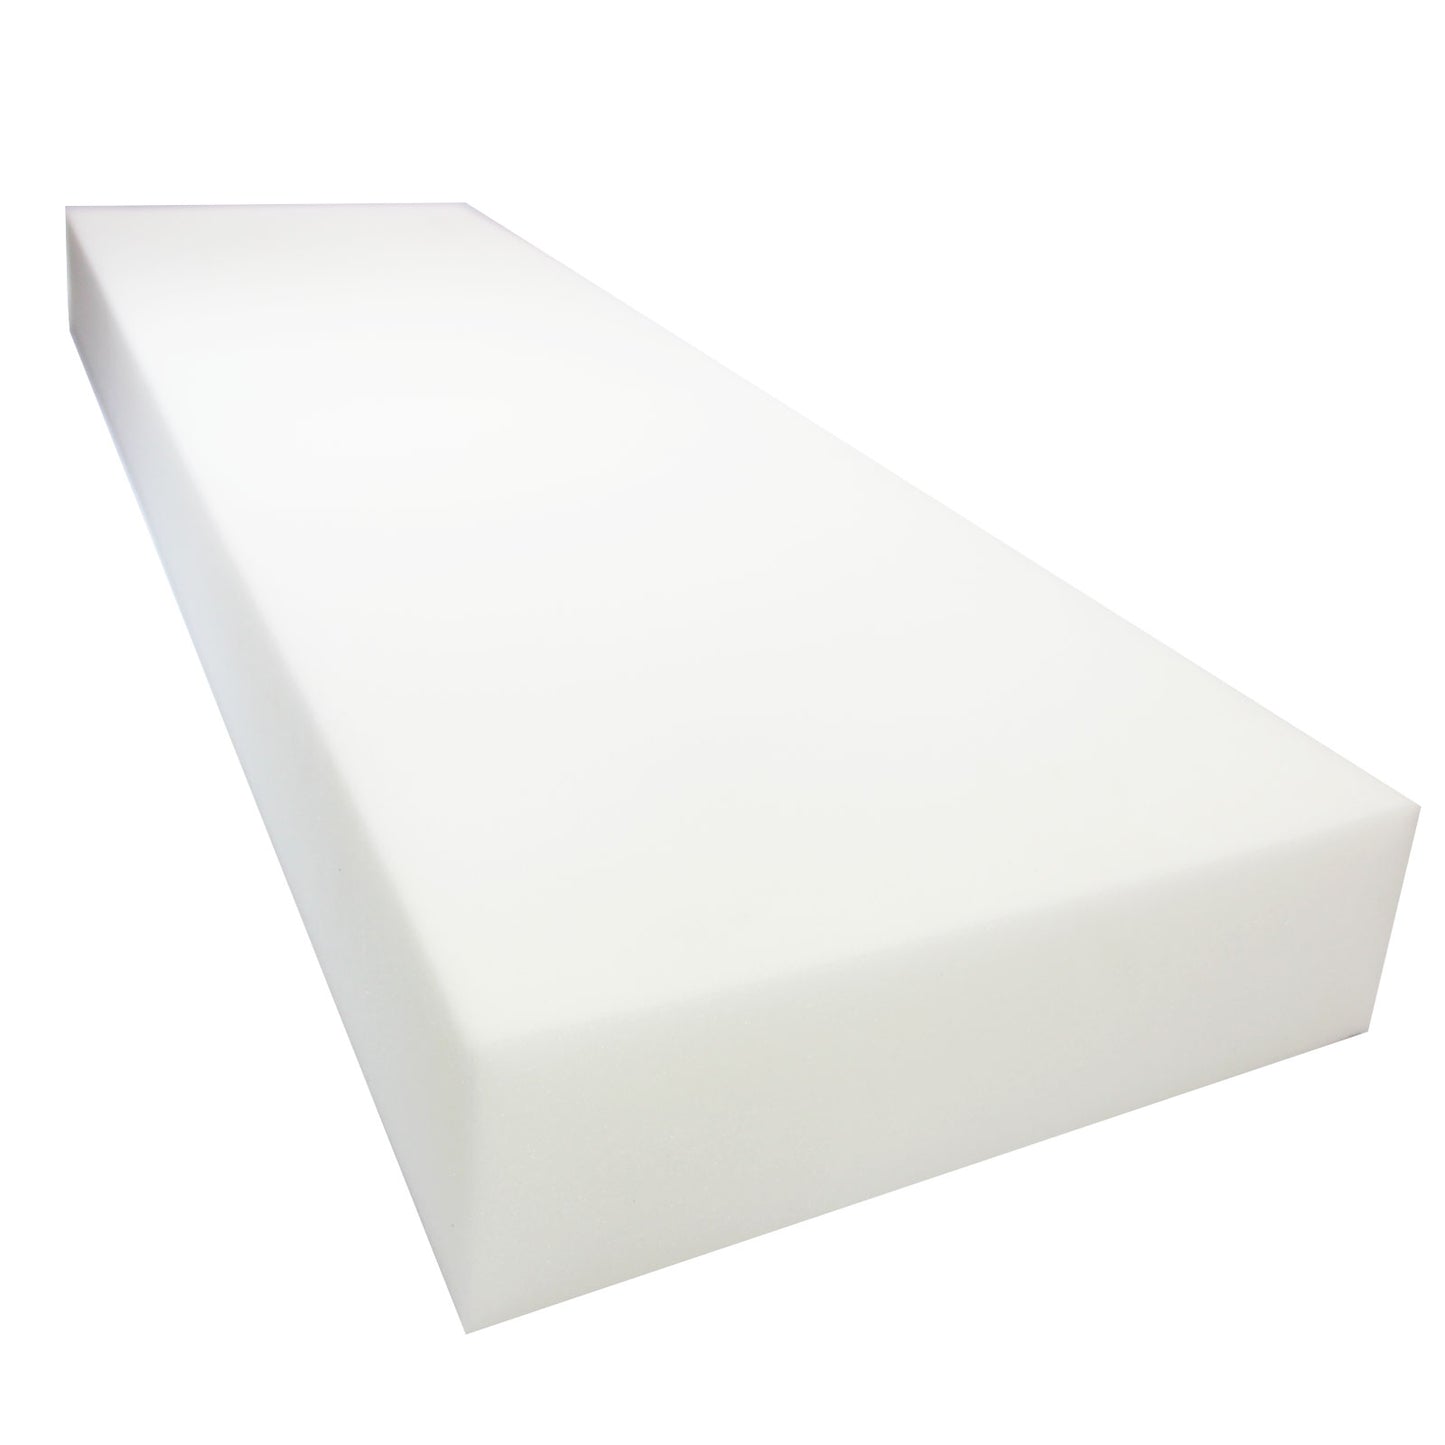 Mybecca 5H x 24W x 72L Regular Density Soft Firm Upholstery Foam Sheet for Seat Replacement, Cross-Sectional Cushion Pad, Foam Padding, Boat Seat, Benches & Auto Car Seats